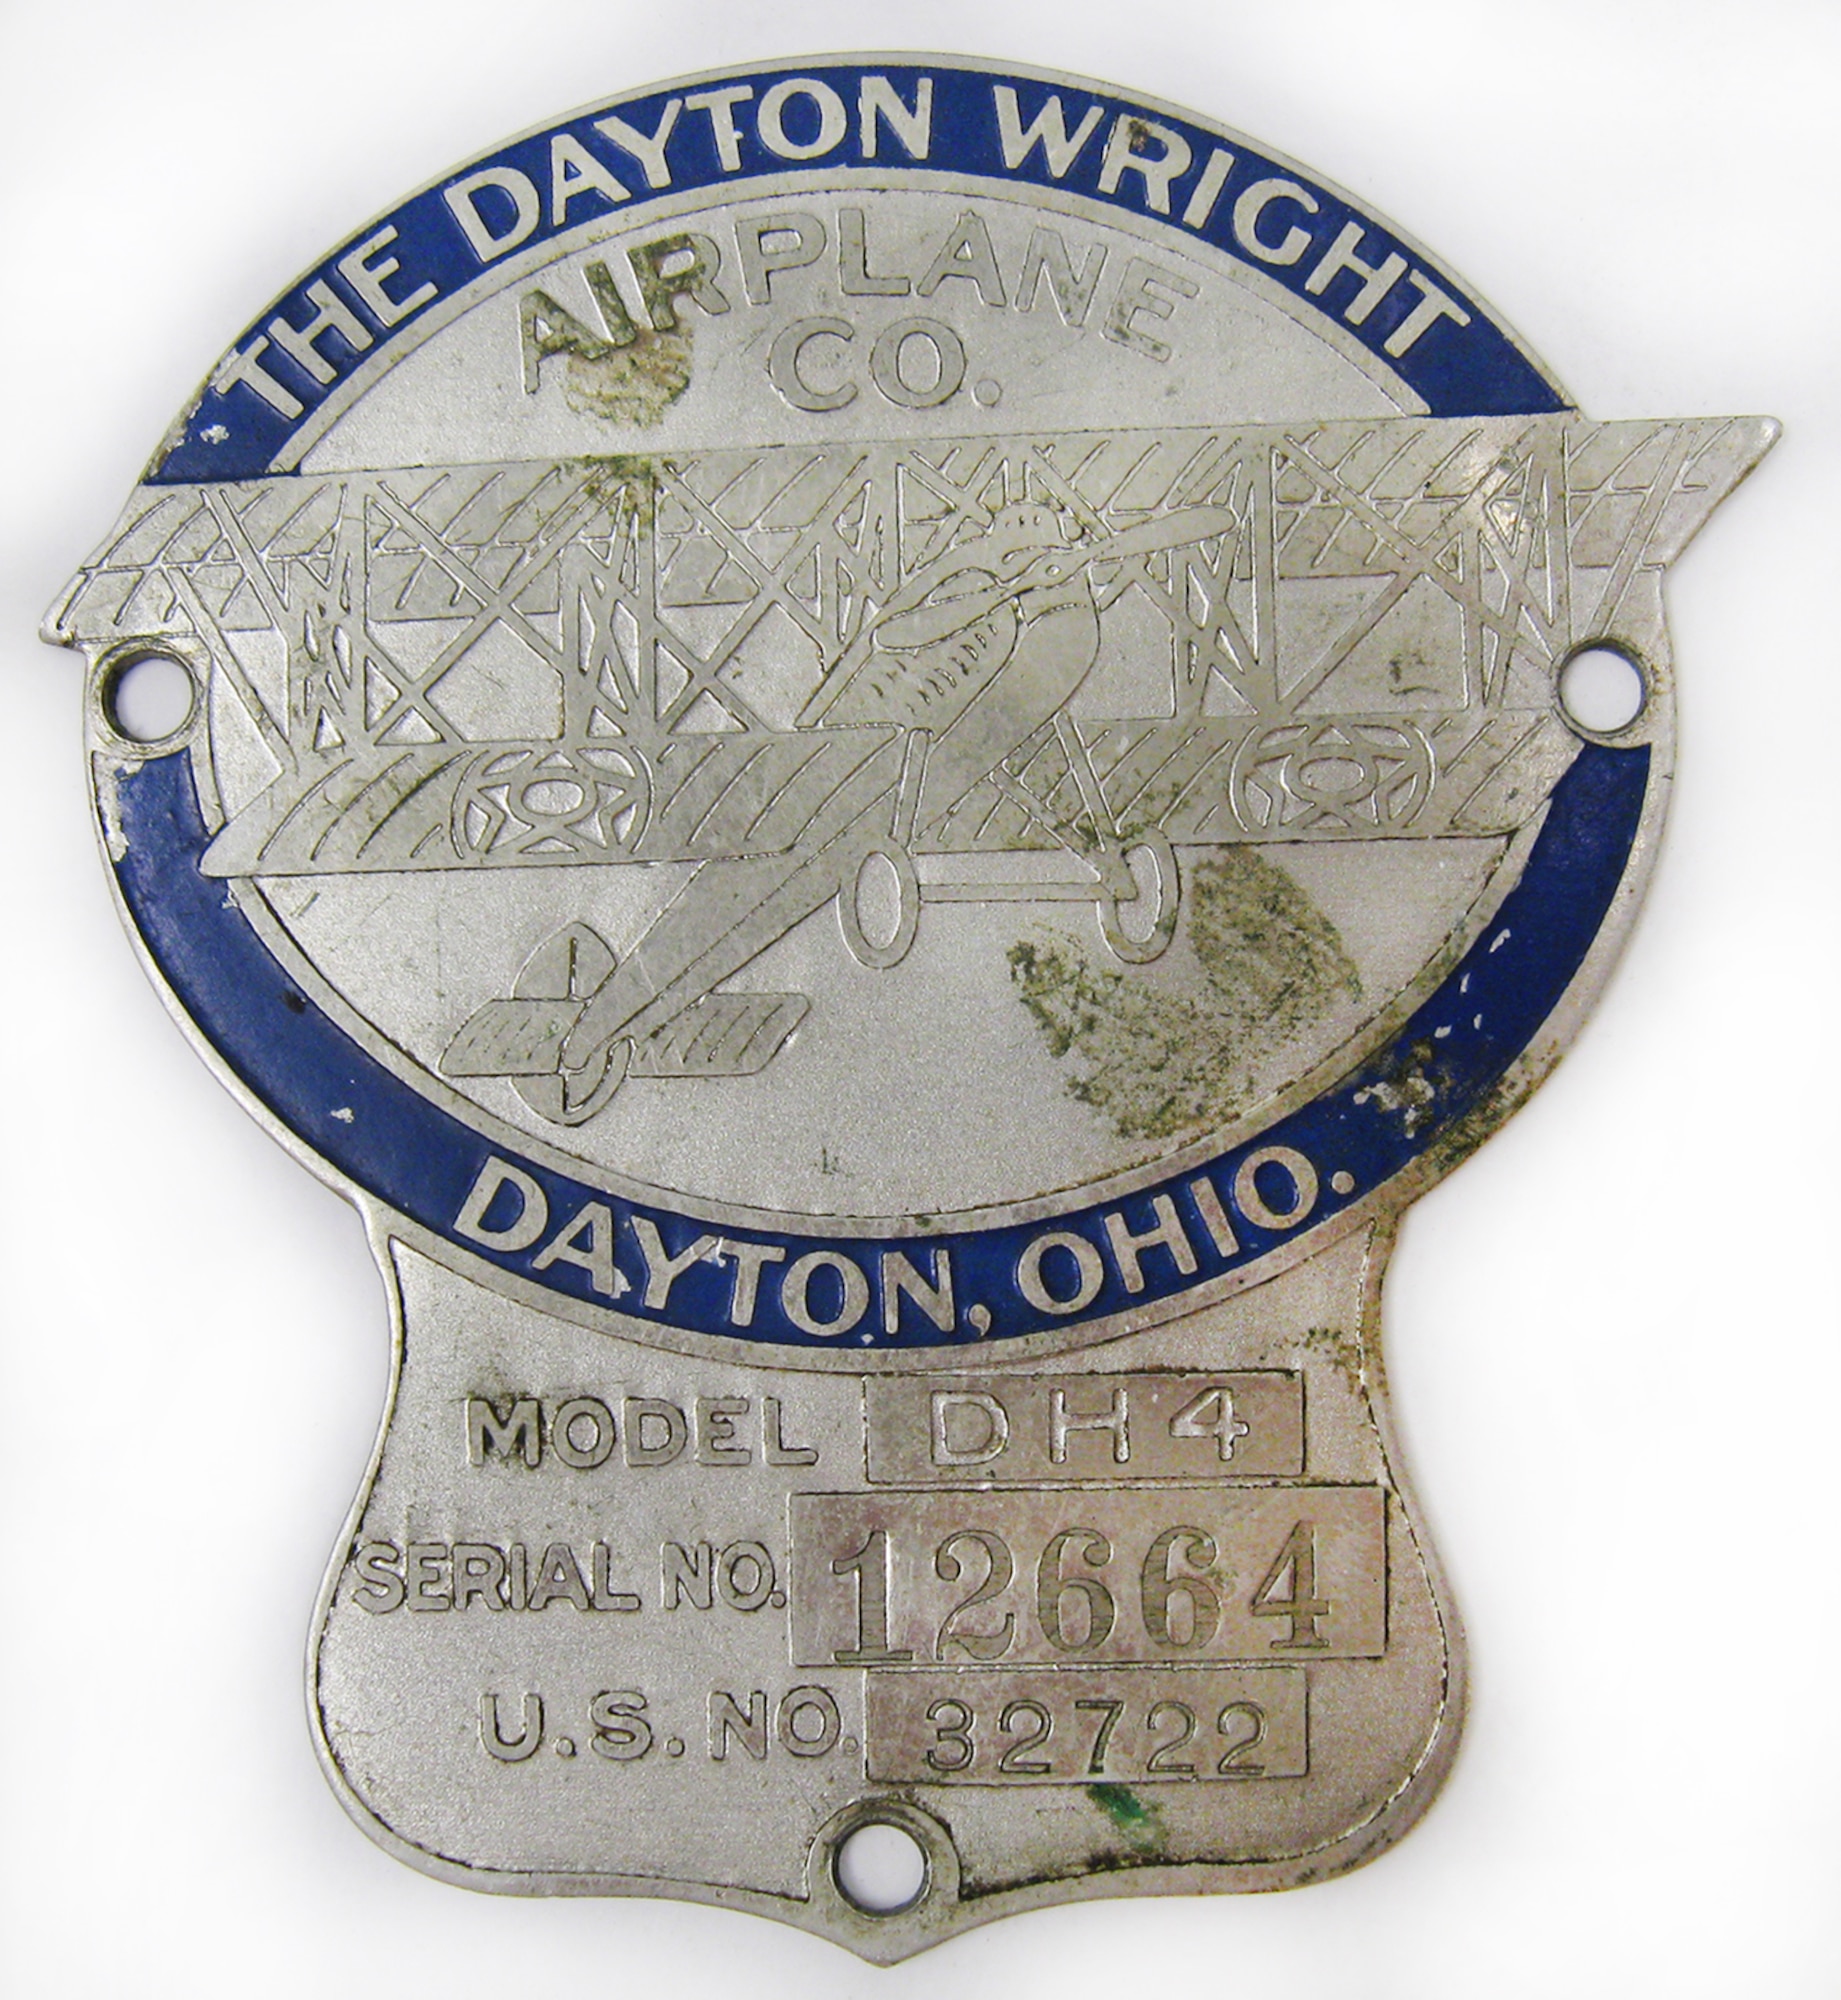 This is a data plate from a DH-4 aircraft with the serial number 12664, U.S. number 32722, and made by The Dayton Wright Airplane Co. in Dayton, Ohio. Per donor, this DH-4 data plate was brought home by the donor's father who served in France during WWI servicing aircraft;  the DH-4 that this data plate came from was damaged and later destroyed. The DH-4, modeled after the British DeHavilland design, was the only U.S.-built aircraft to see combat during WWI. (U.S. Air Force photo)